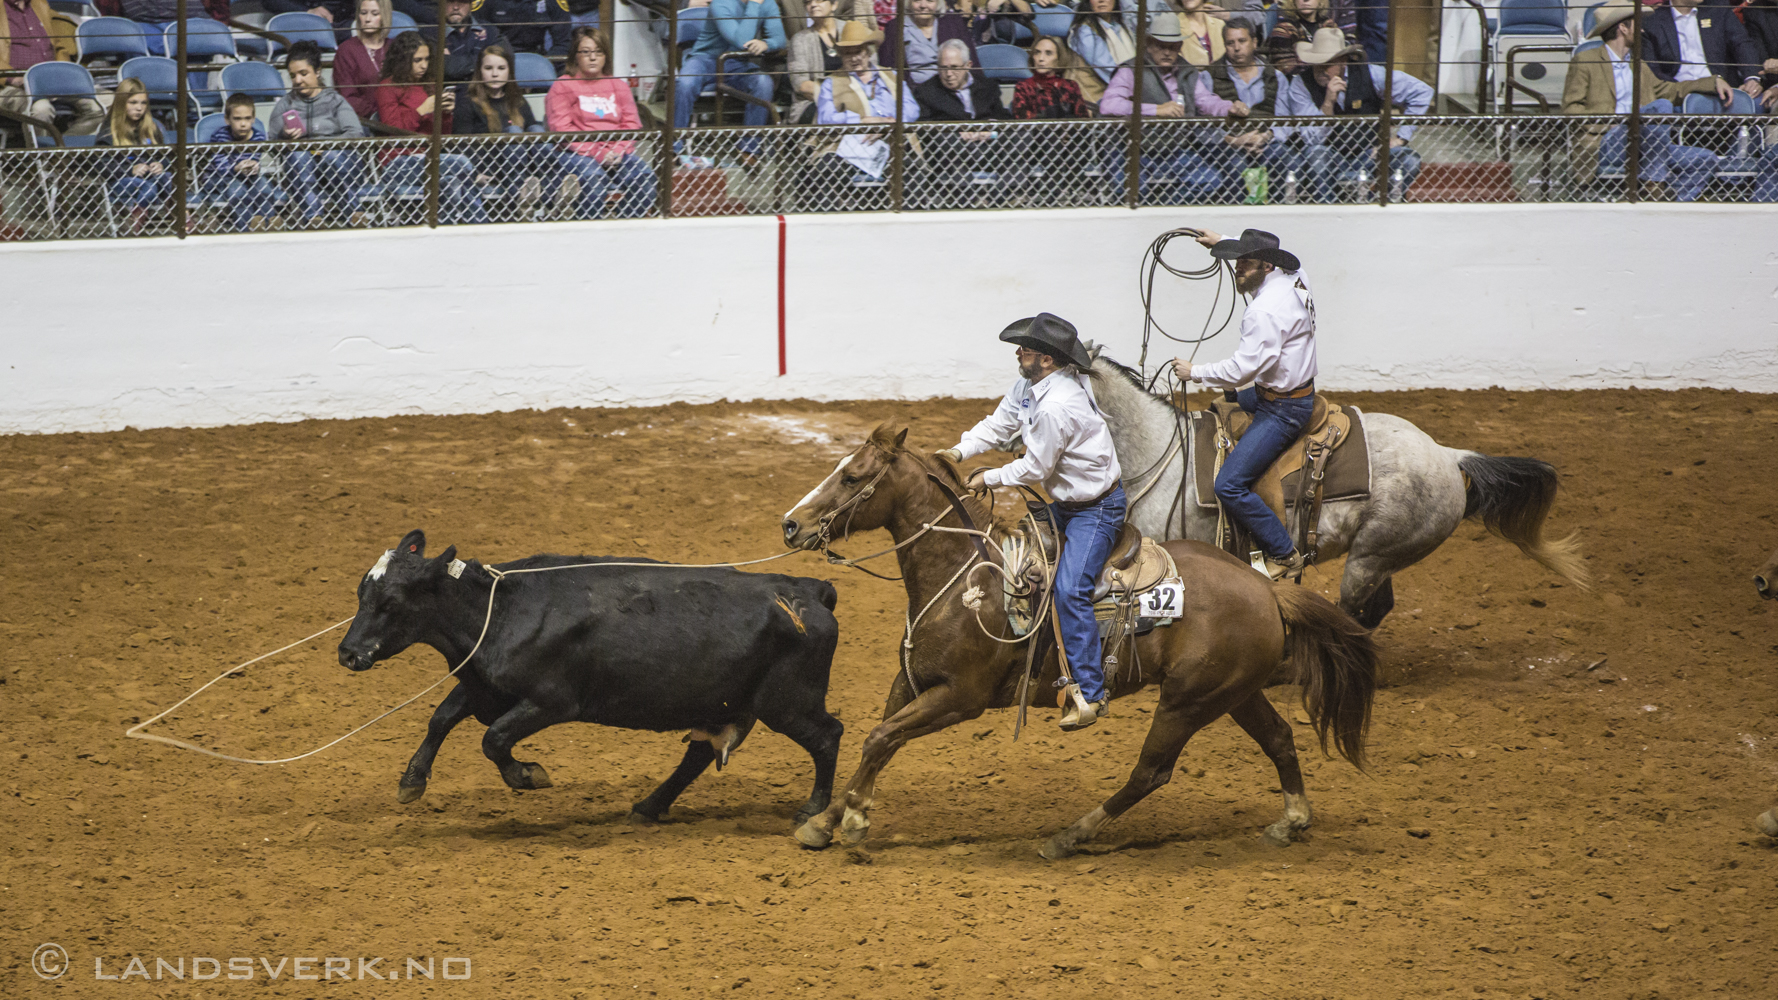 Fort Worth Stock Show & Rodeo, Texas. 

(Canon EOS 5D Mark III / Canon EF 70-200mm f/2.8 L IS II USM)